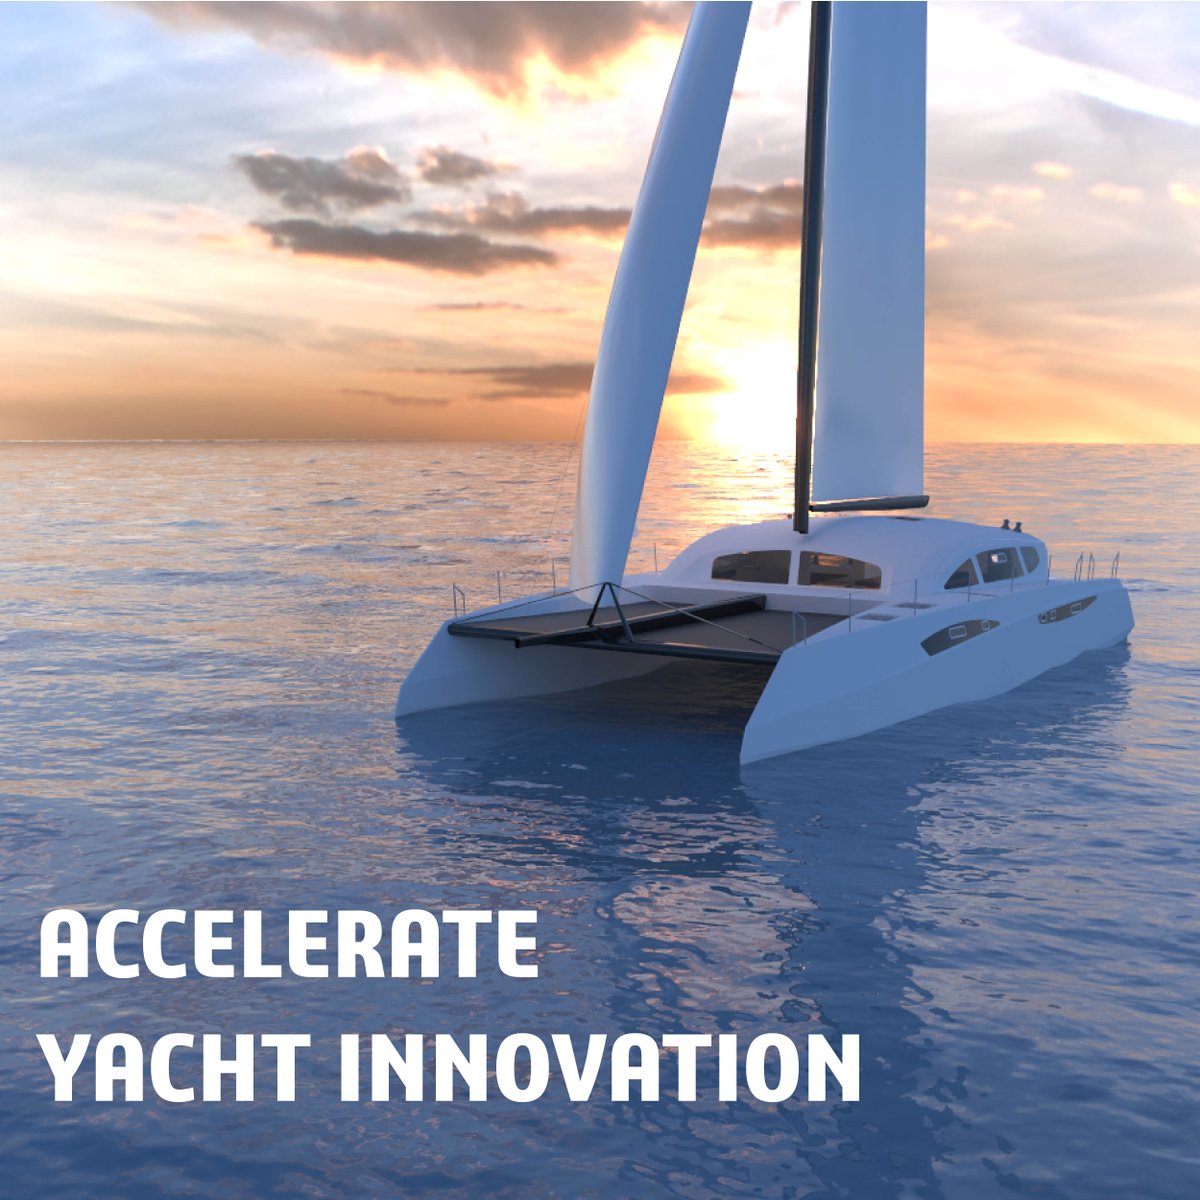 Want to accelerate yachts & boats innovation? Watch our webinar replay to discover advanced solutions to increase your competitiveness and profitability.

Watch the replay >> go.3ds.com/oKM

#boatbuilding #yachtingindustry